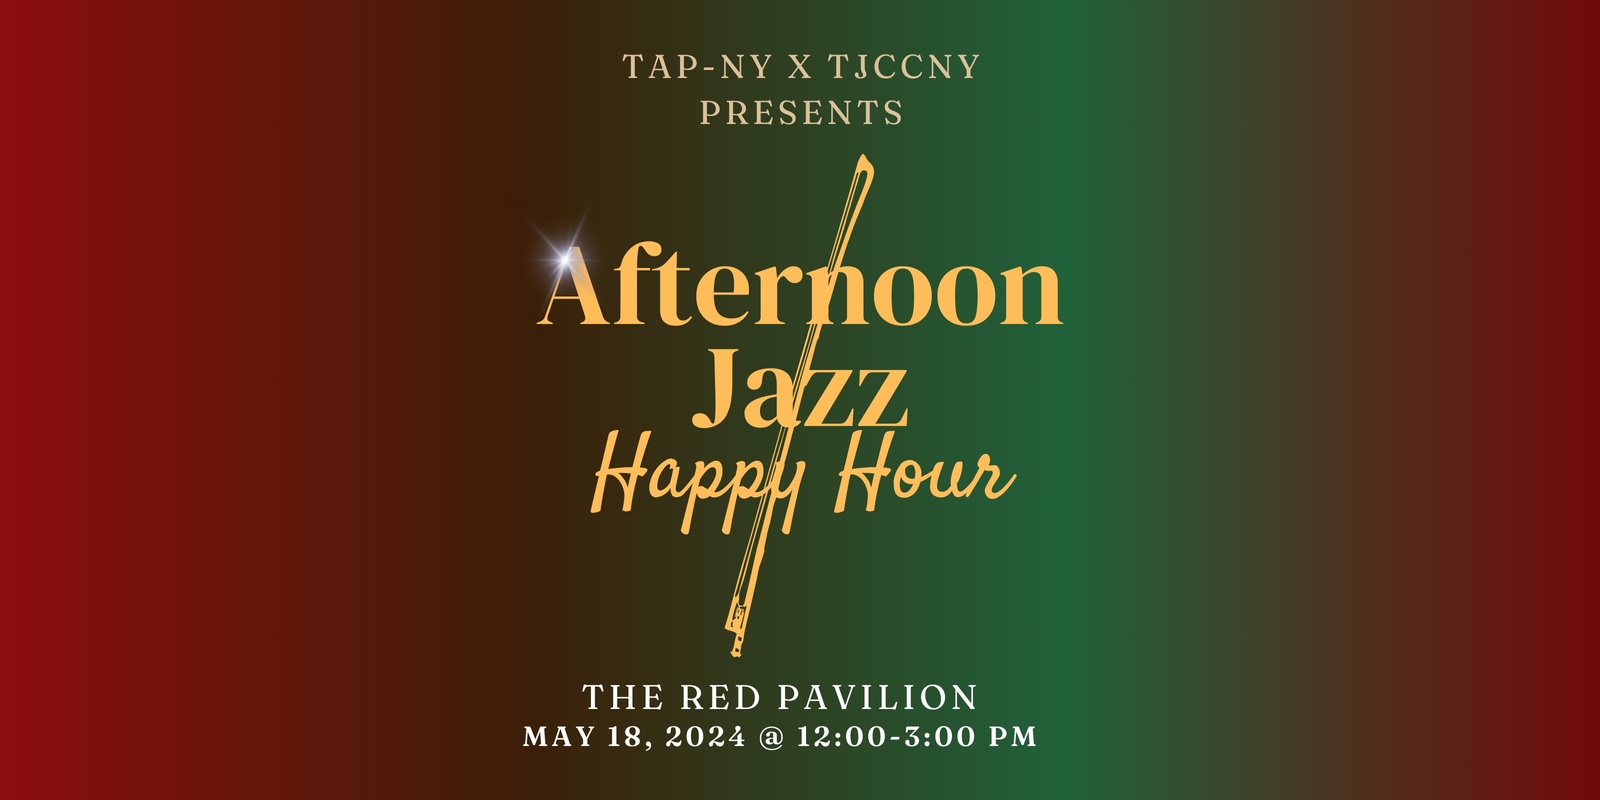 Banner image for TAP-NY x TJCCNY Afternoon Jazz Happy Hour